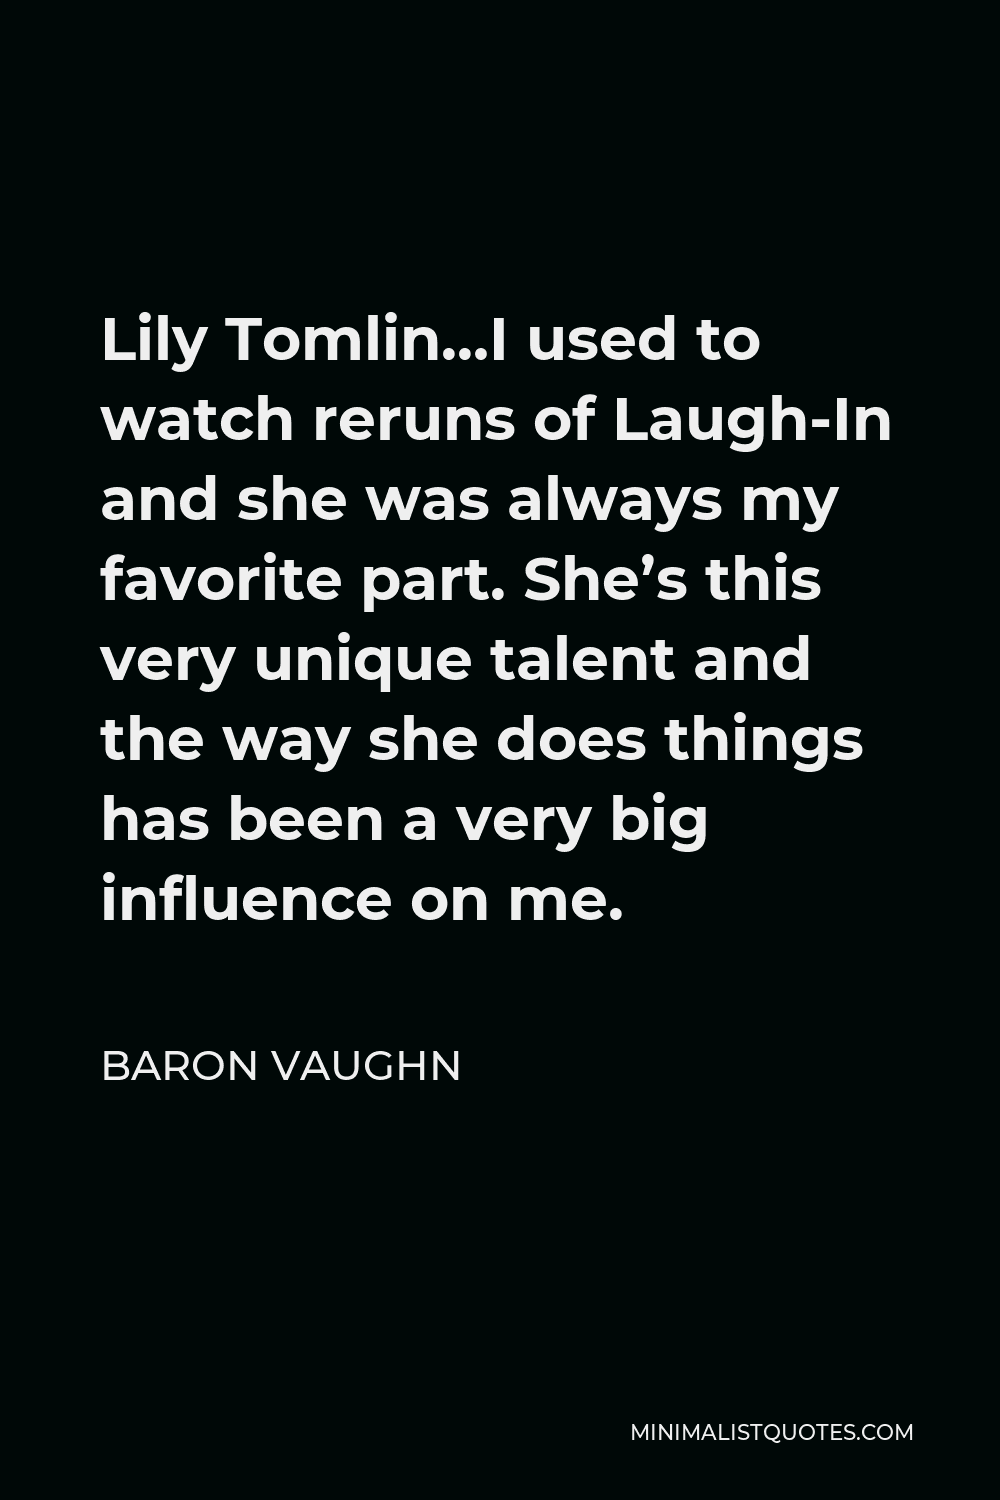 Baron Vaughn Quote - Lily Tomlin…I used to watch reruns of Laugh-In and she was always my favorite part. She’s this very unique talent and the way she does things has been a very big influence on me.